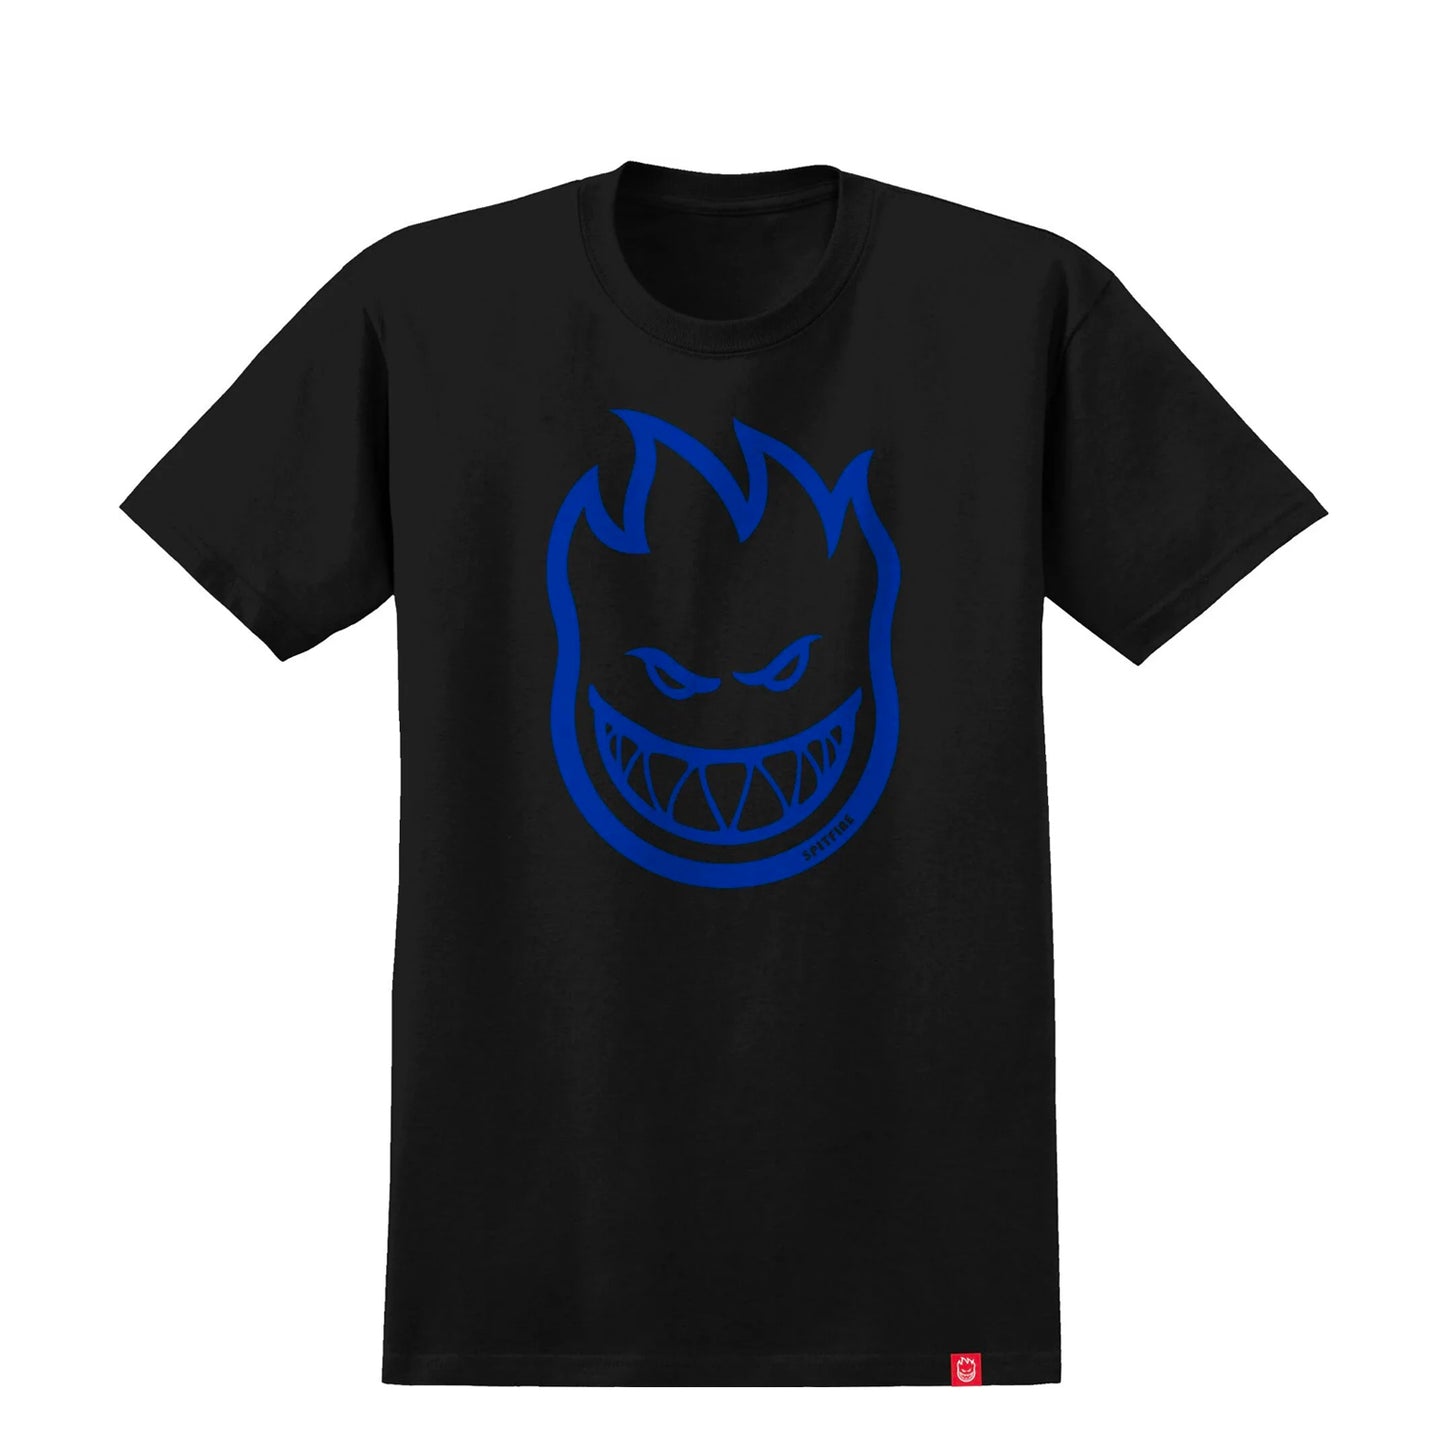 Spitfire Youth Bighead T-Shirt - Black / Blue - Prime Delux Store